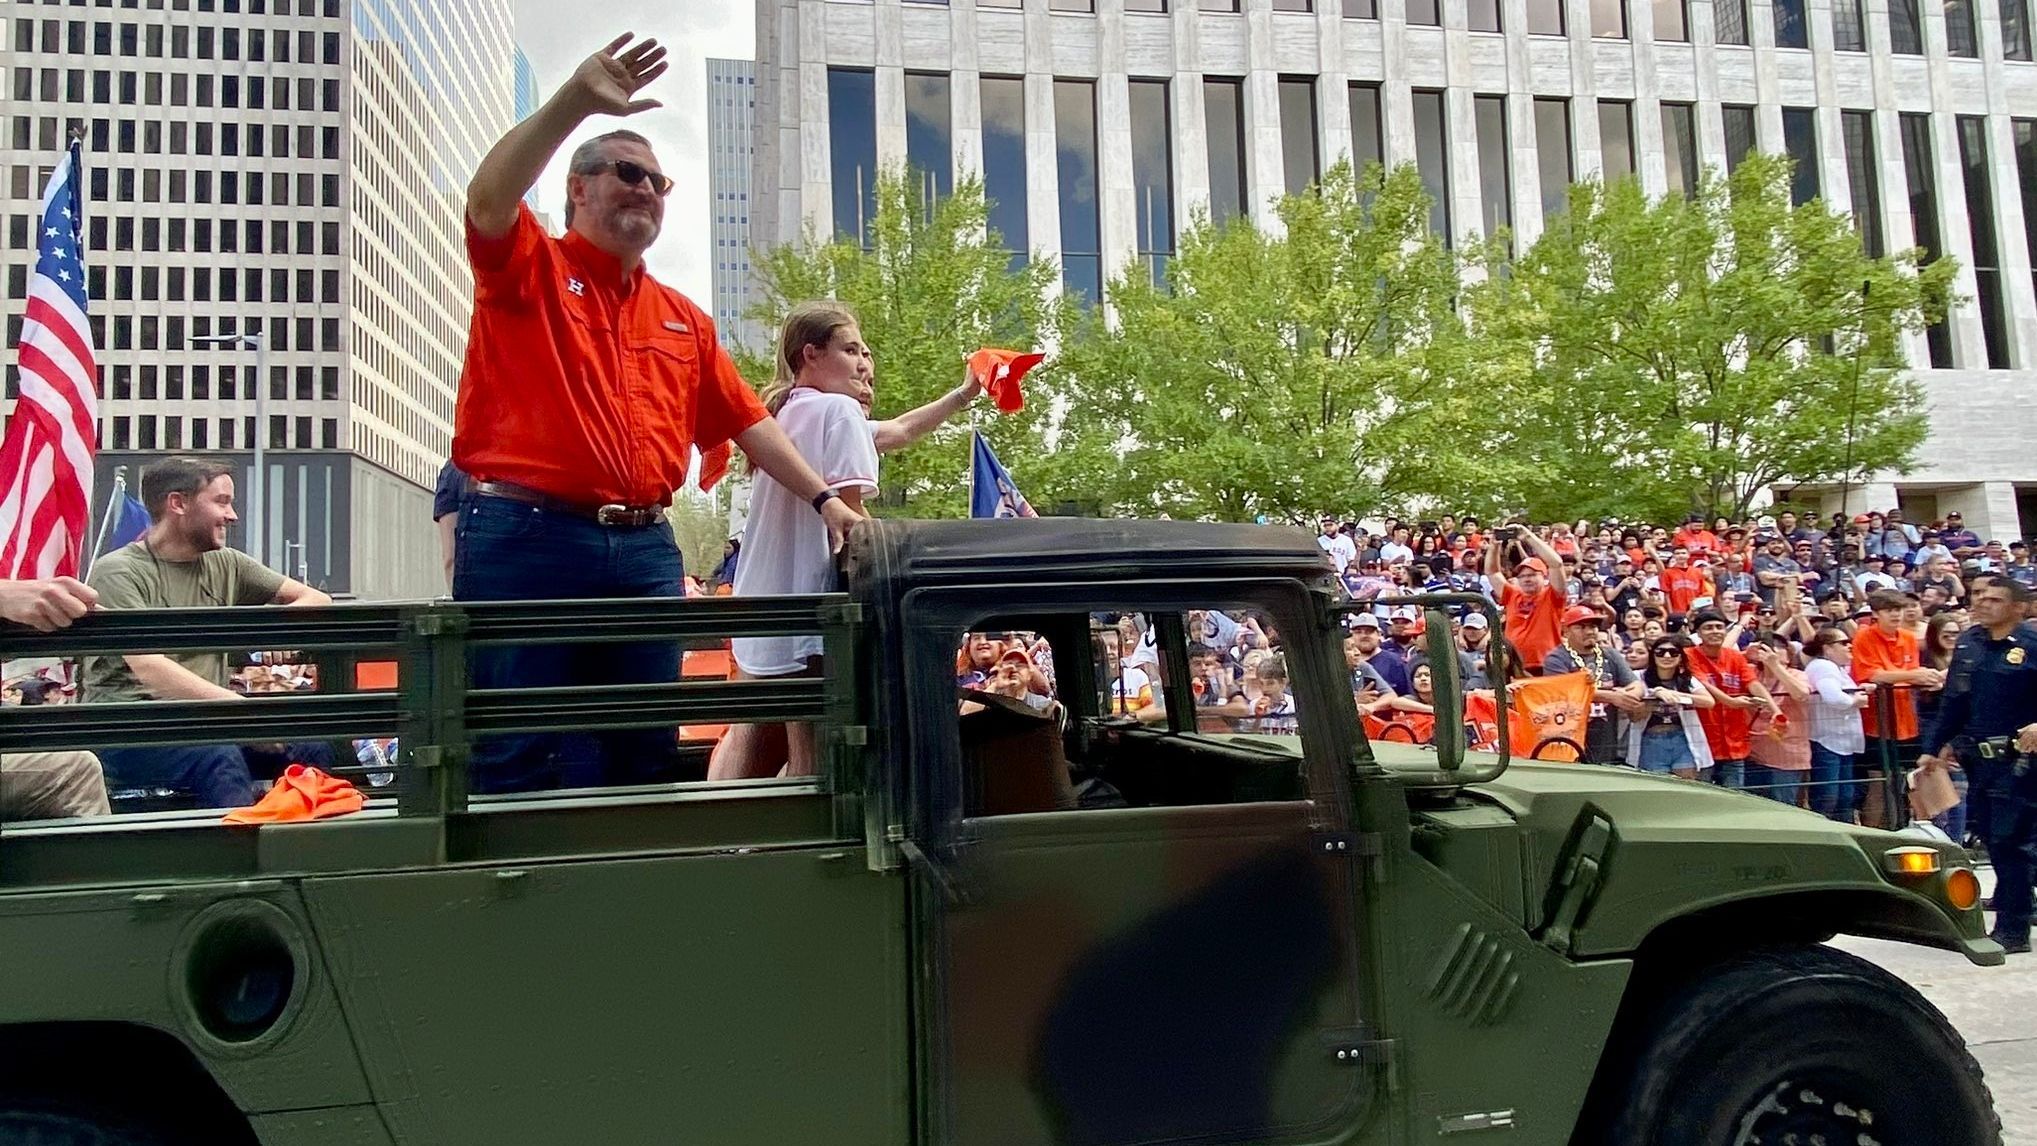 Senator Ted Cruz hit with a beer can during a parade in Houston